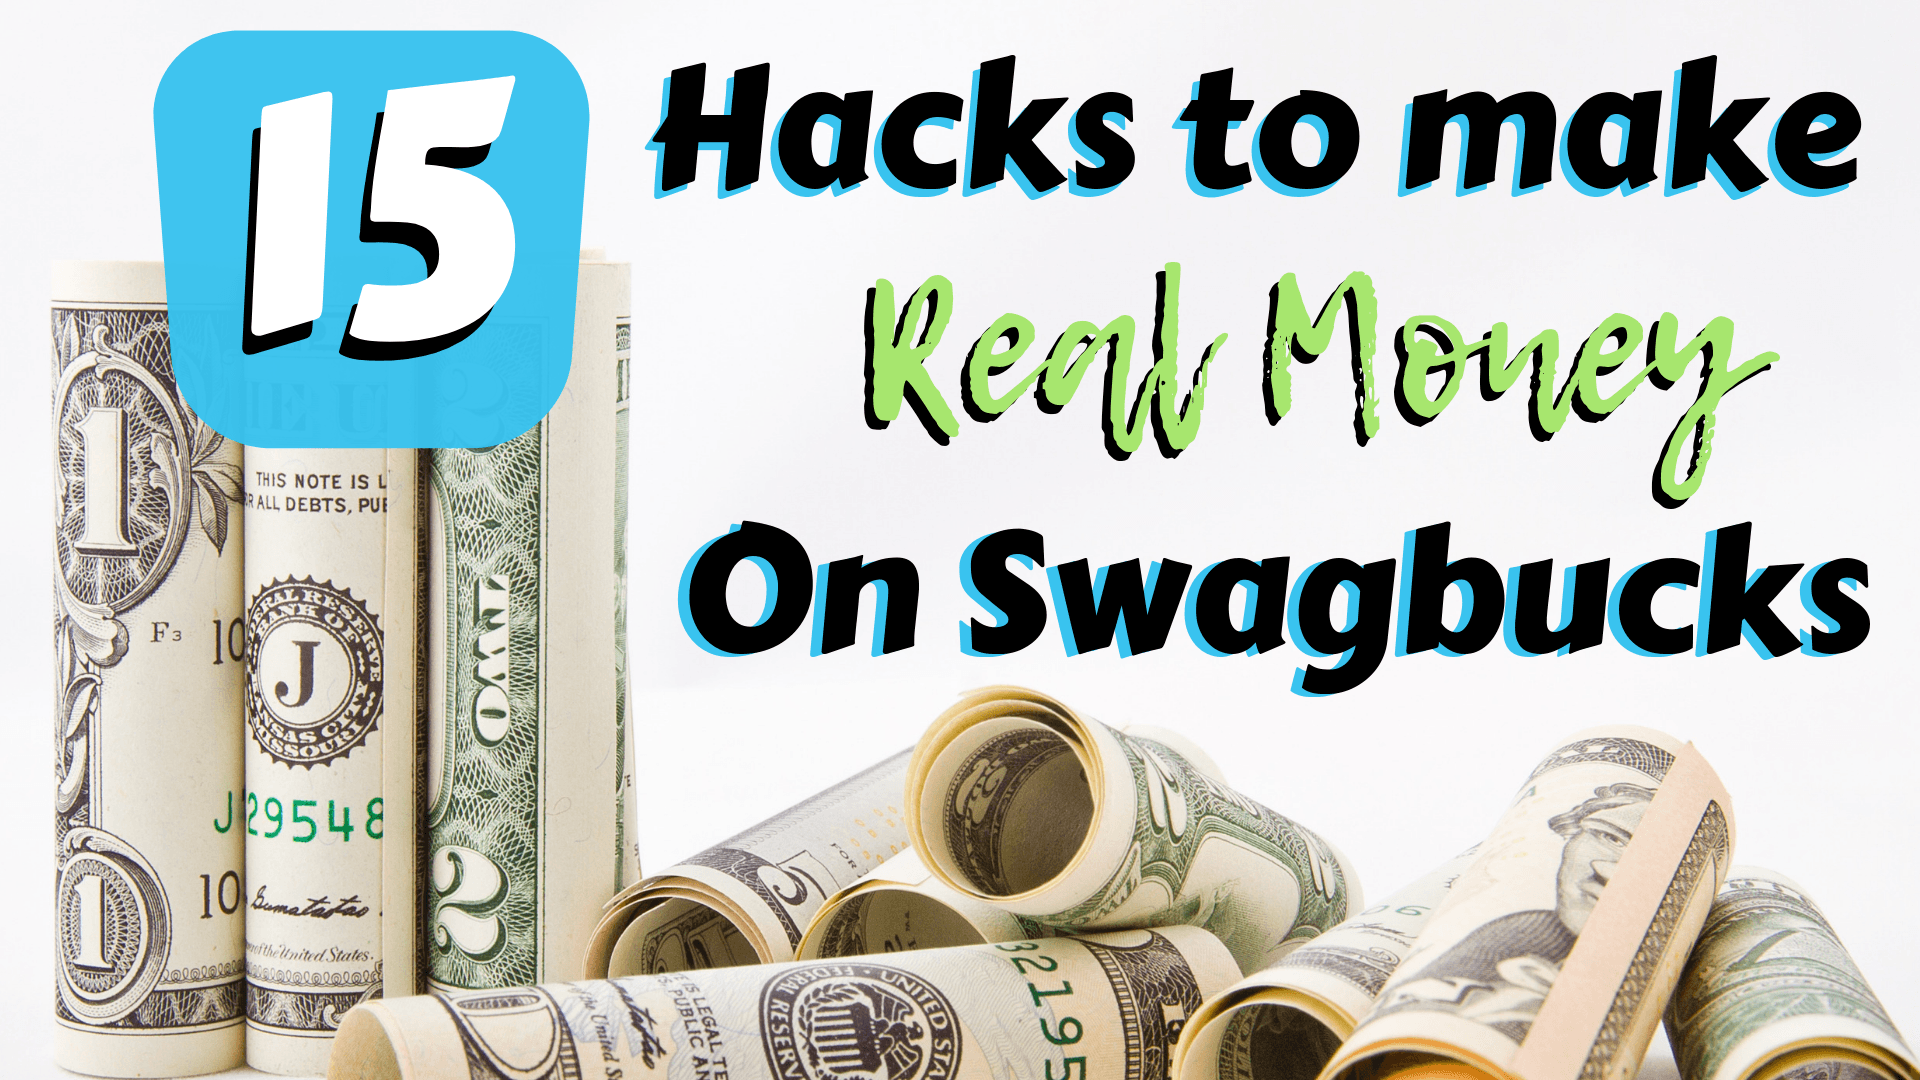 What Is Swagbucks? How To Earn Rewards And Make Easy Money With Swagbucks?